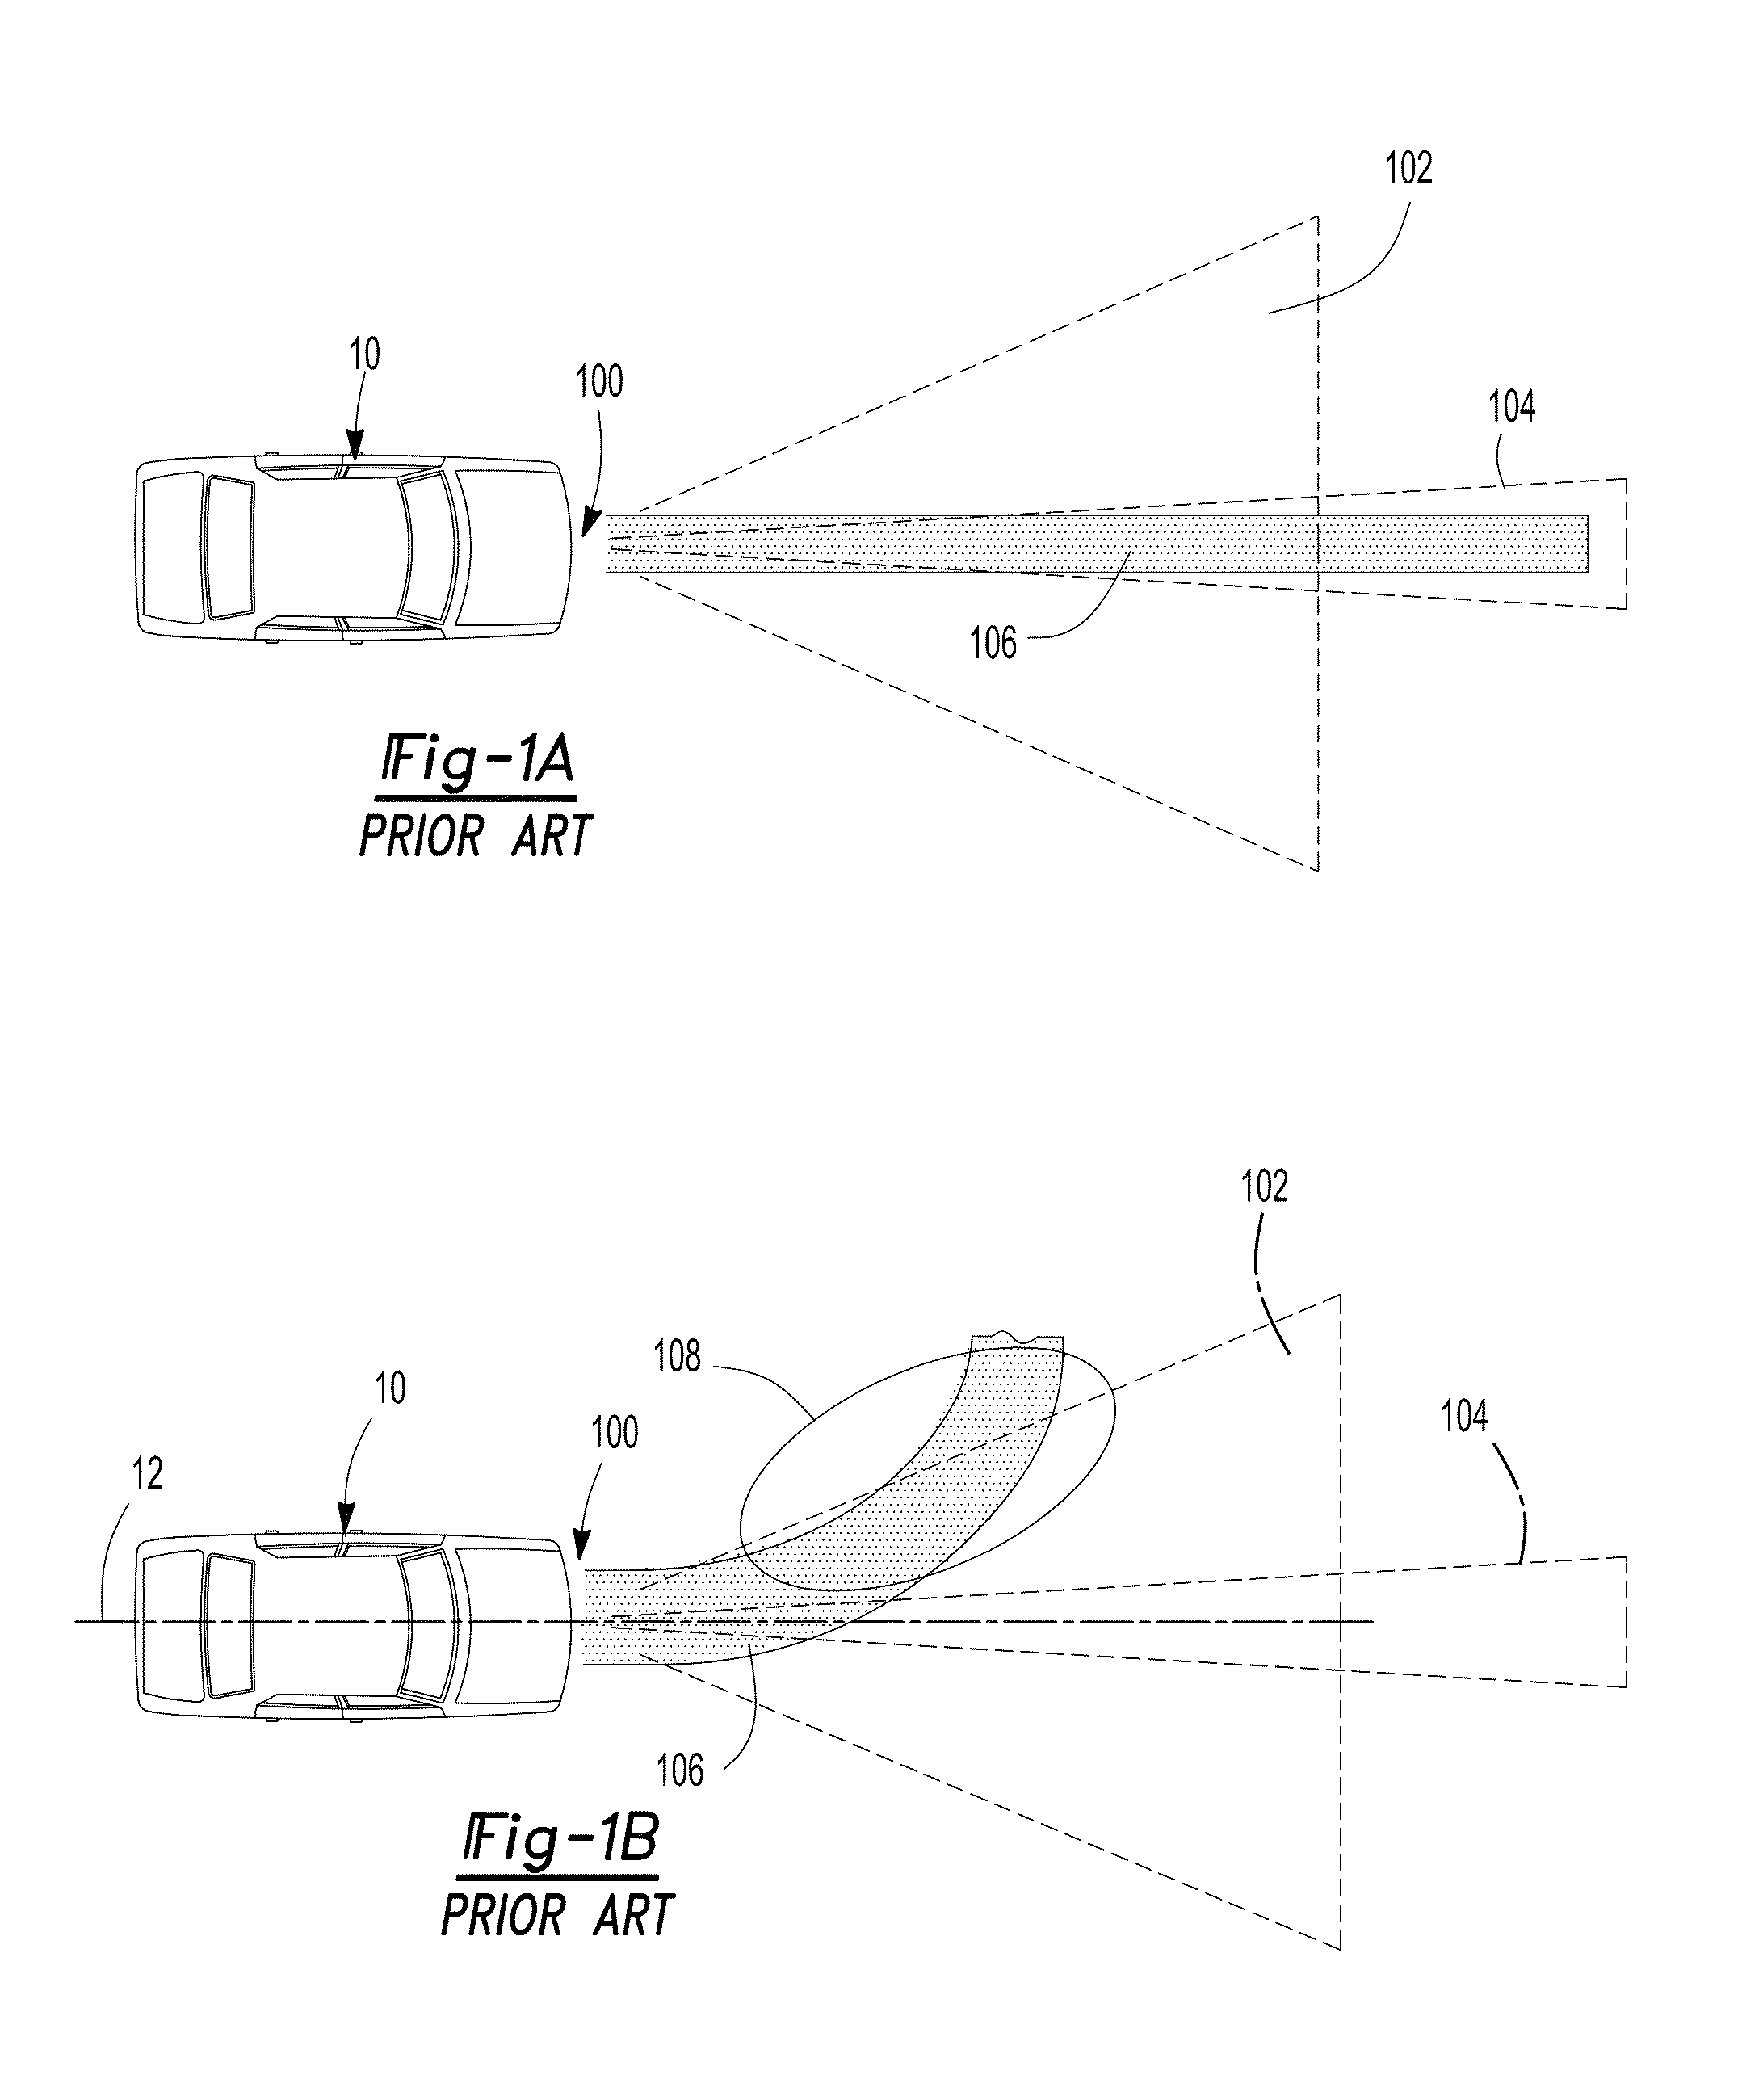 Dynamic allocation of radar beams in automotive environments with phased array radar